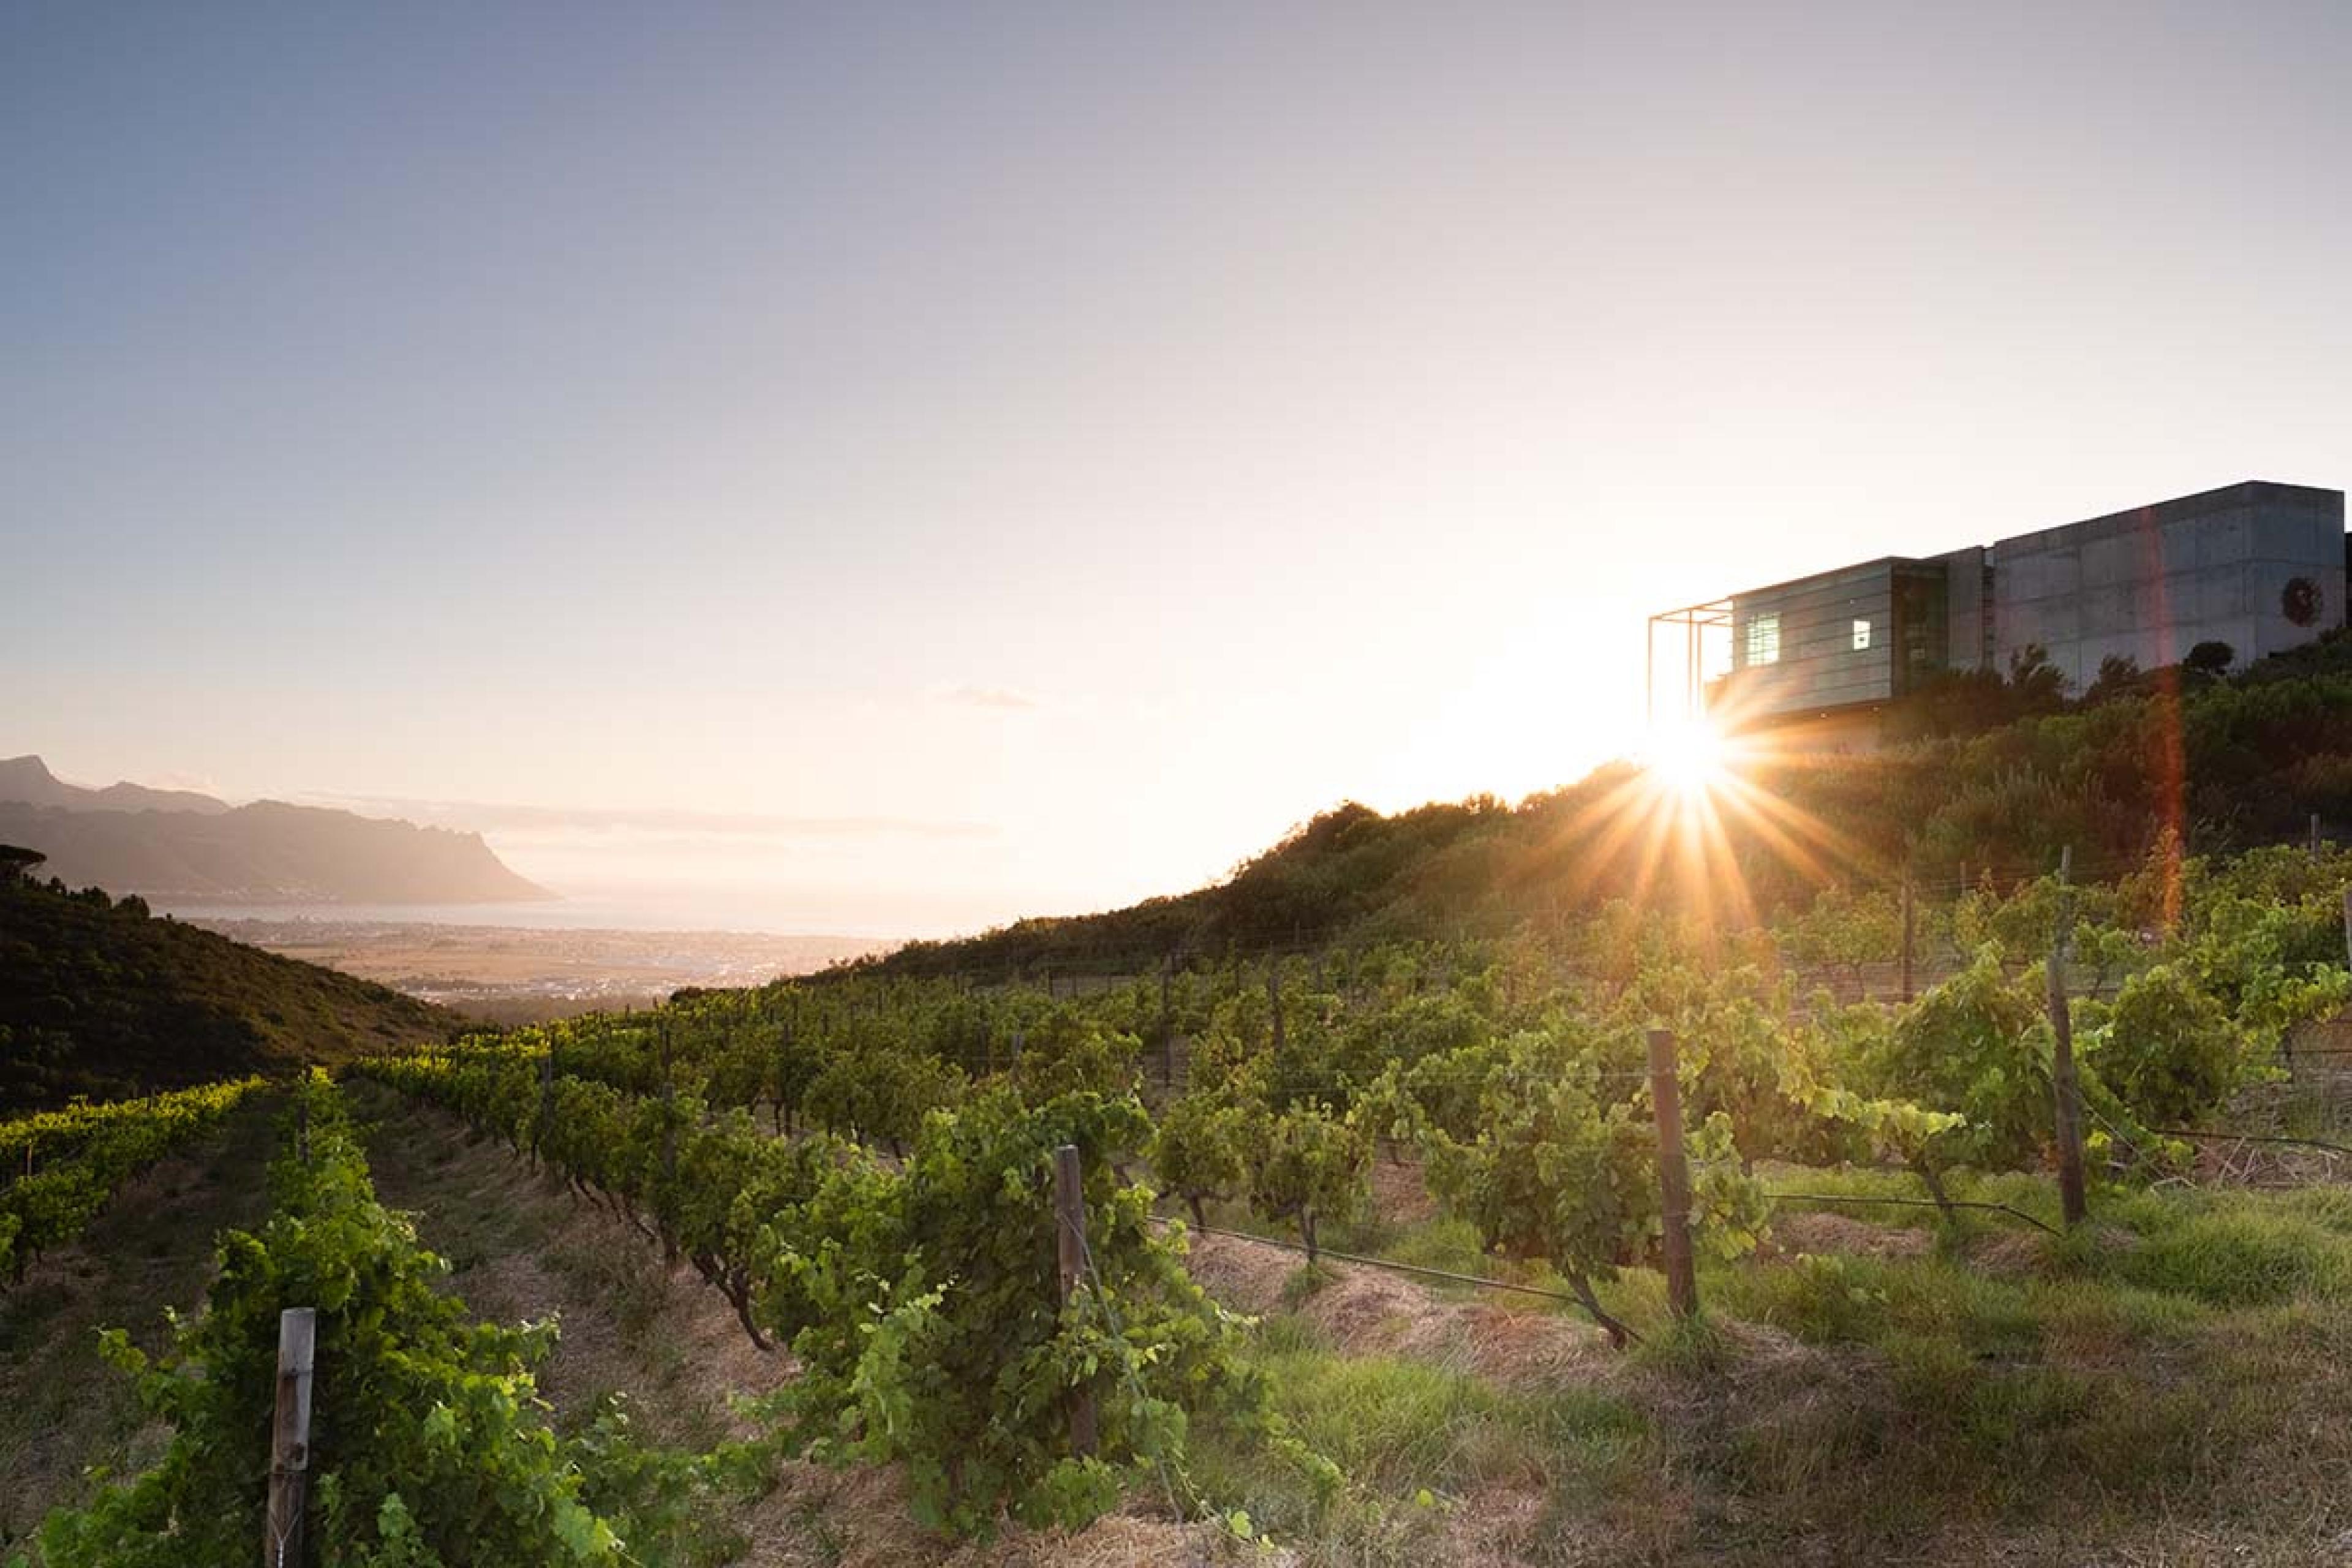 restaurant on a hill at sunset with a vineyard sprawled below